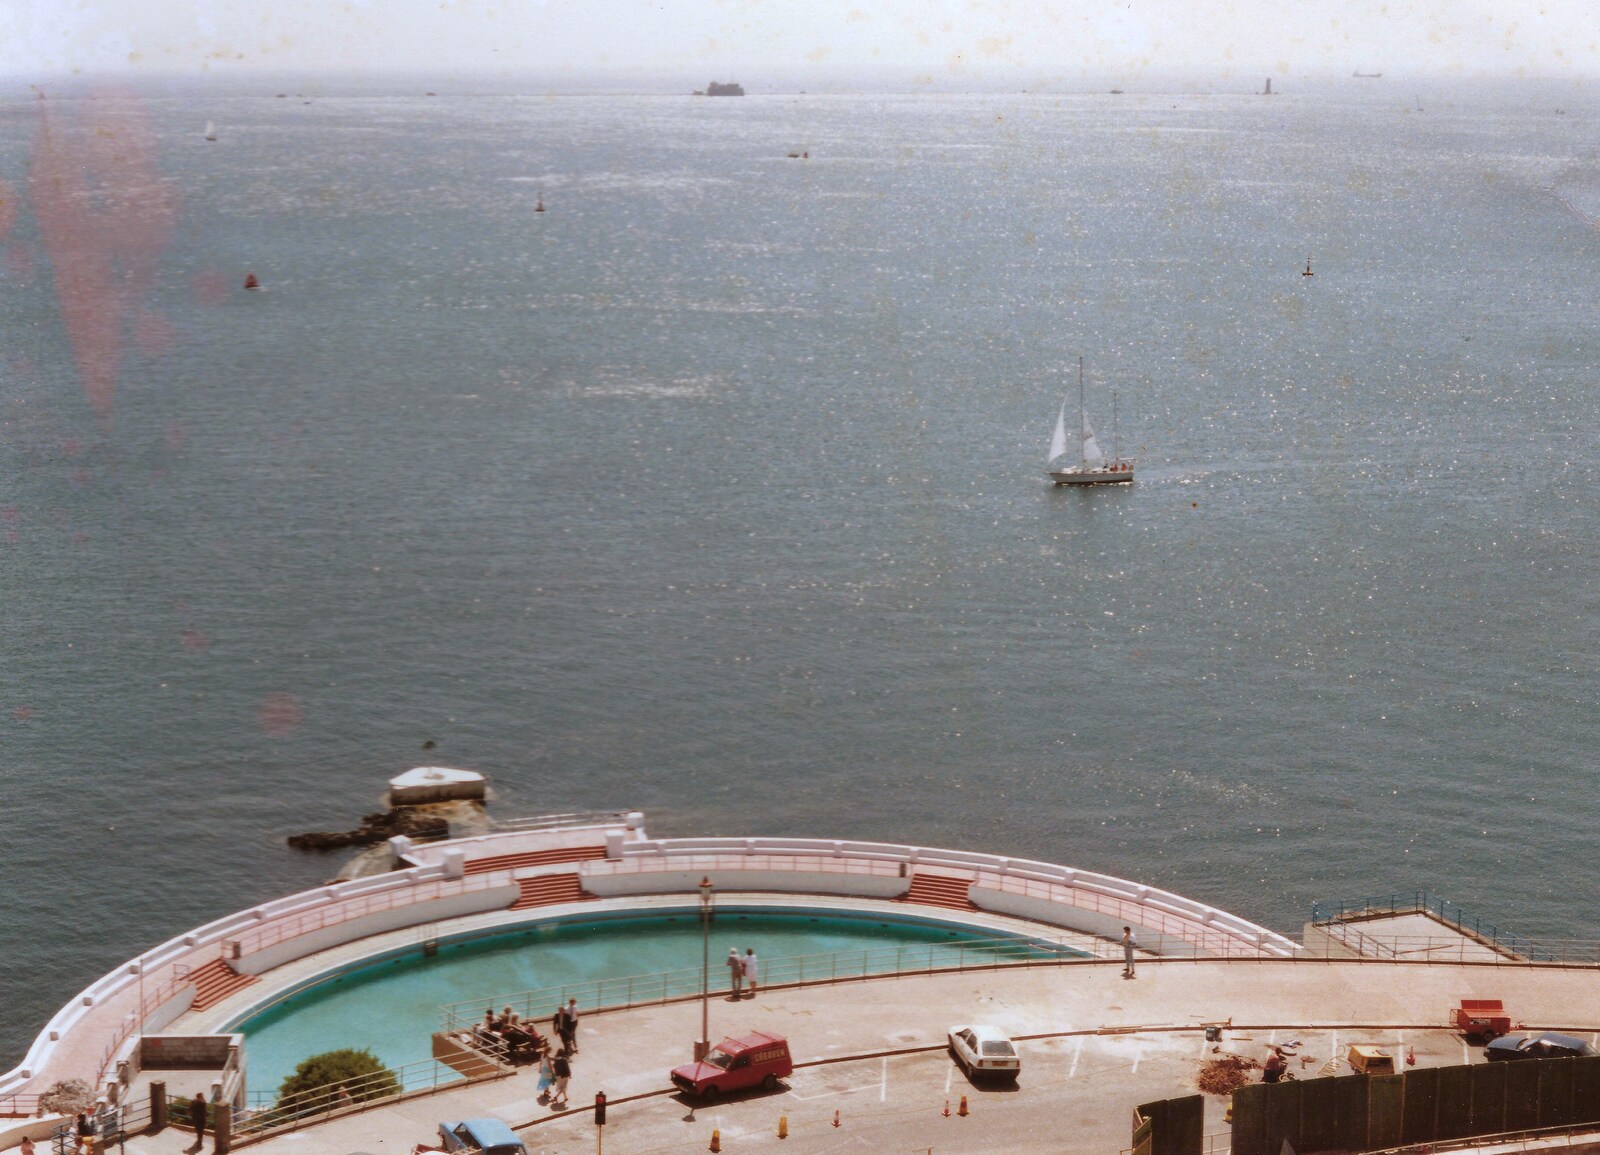 Tinside Lido, before its restoration from Aerial Scenes of Plymouth, Devon - 28th June 1987